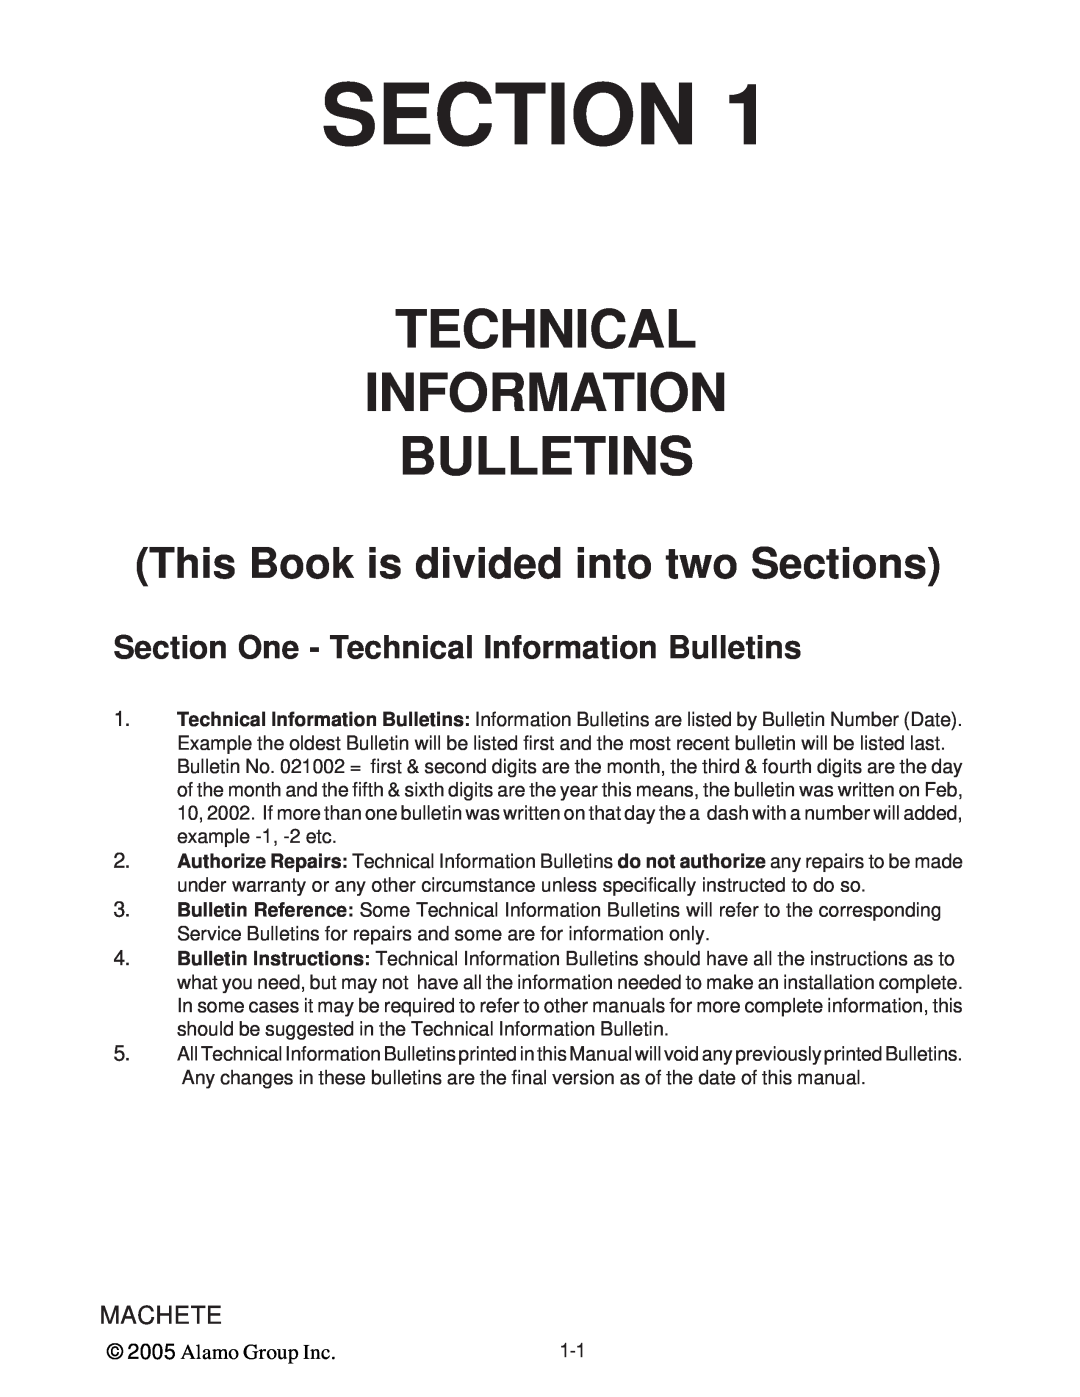 Alamo T 7740 manual Technical Information Bulletins, Machete, Alamo Group Inc, This Book is divided into two Sections 